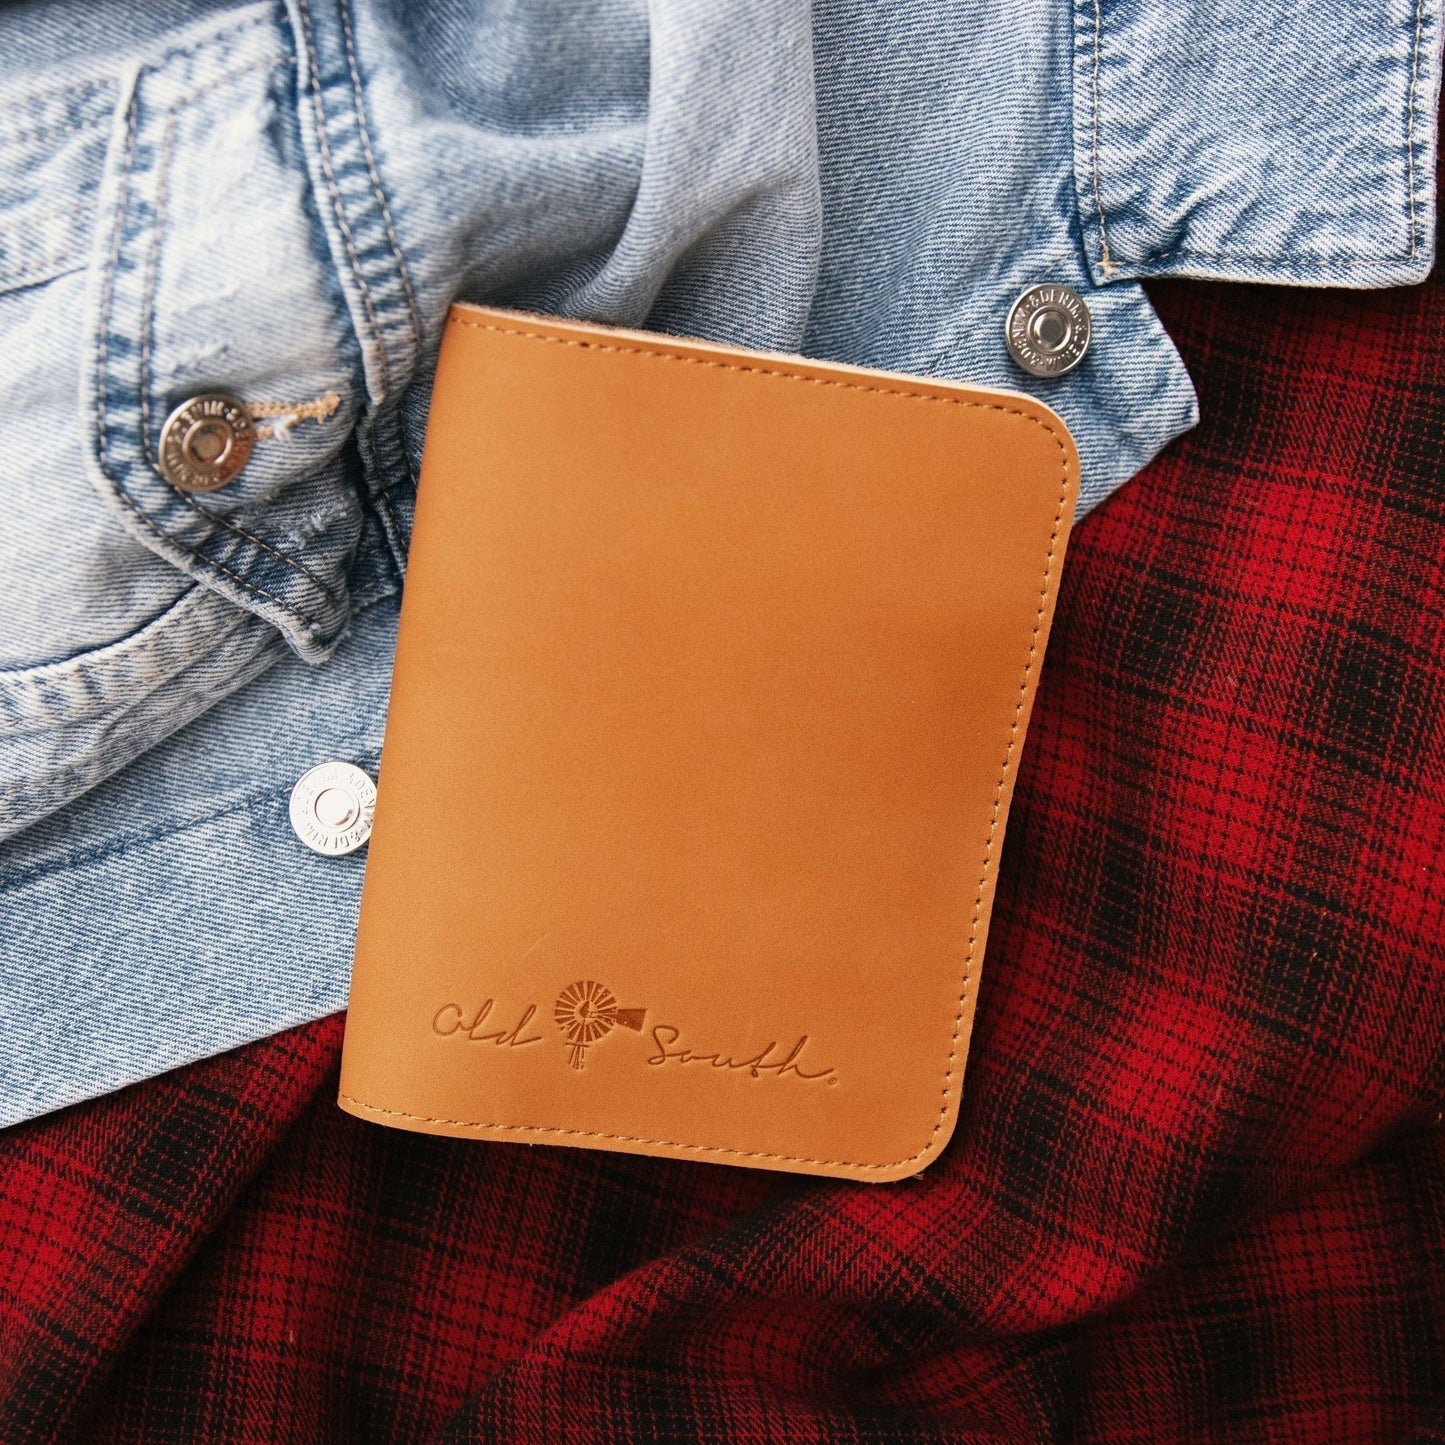 OldSouthApparel_Leather Passport Wallet